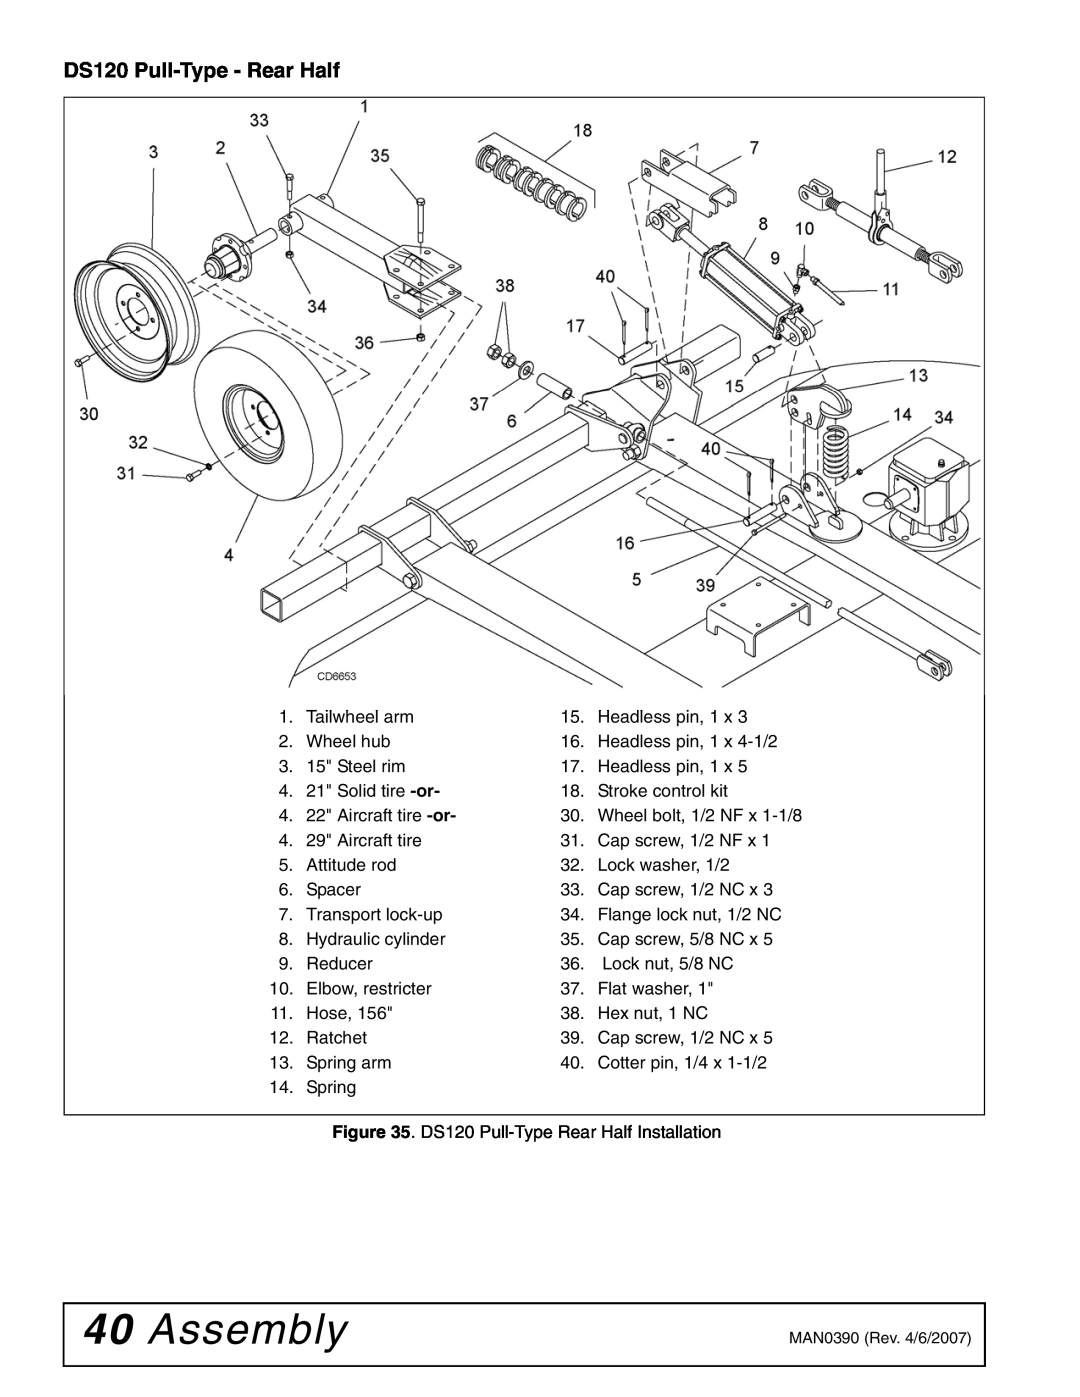 Woods Equipment DS96 manual Assembly, DS120 Pull-Type - Rear Half 